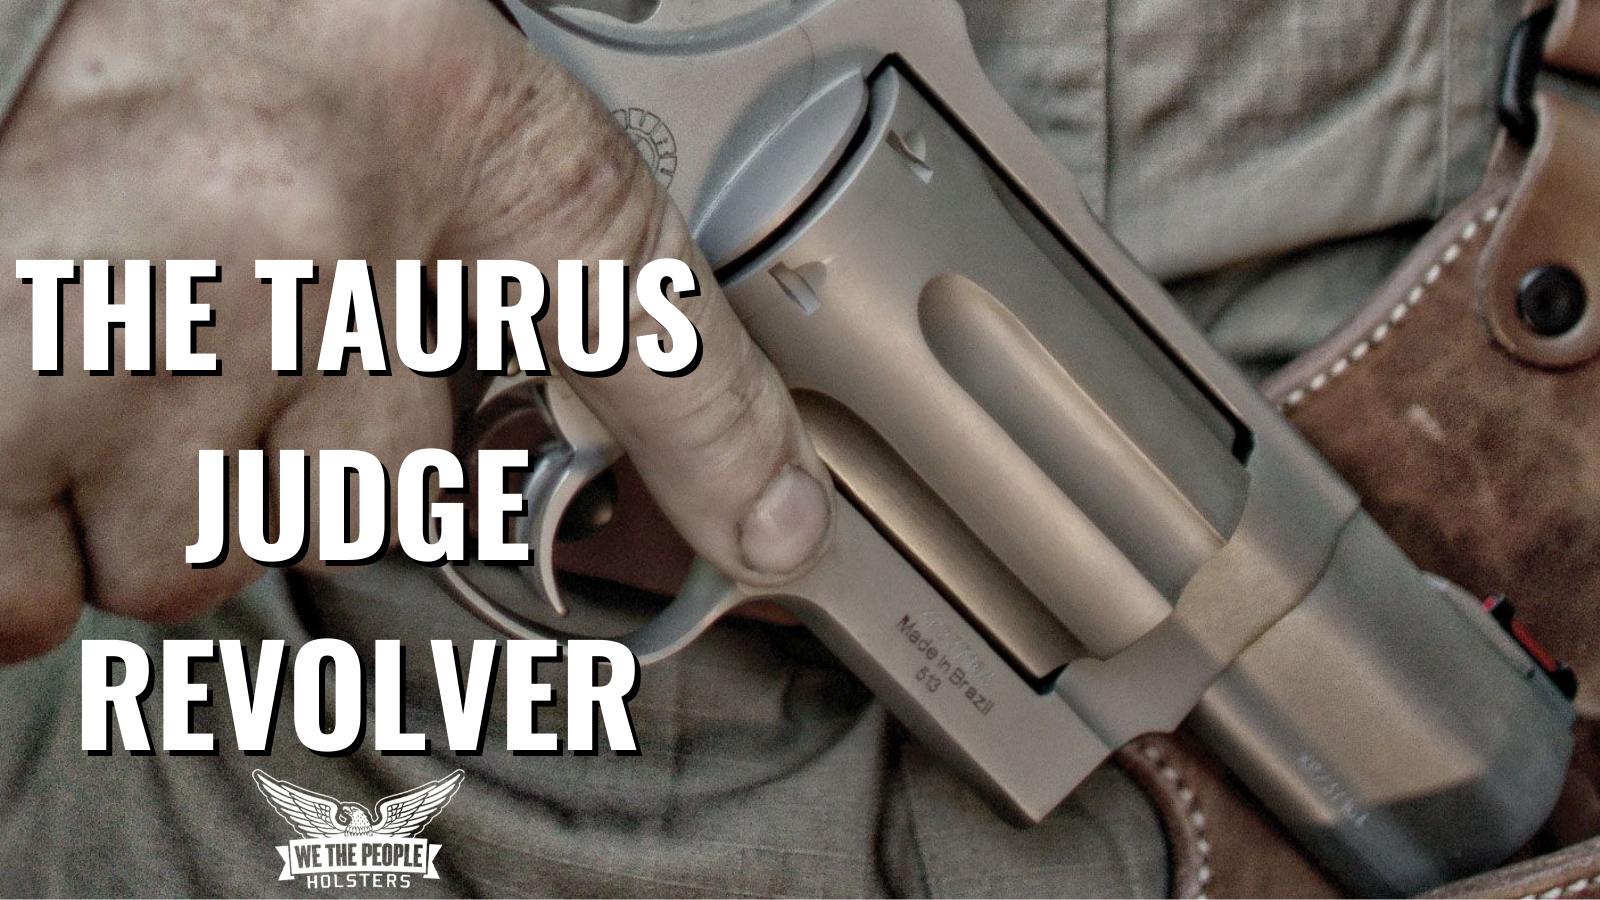 A Review of the Taurus Judge Revolver